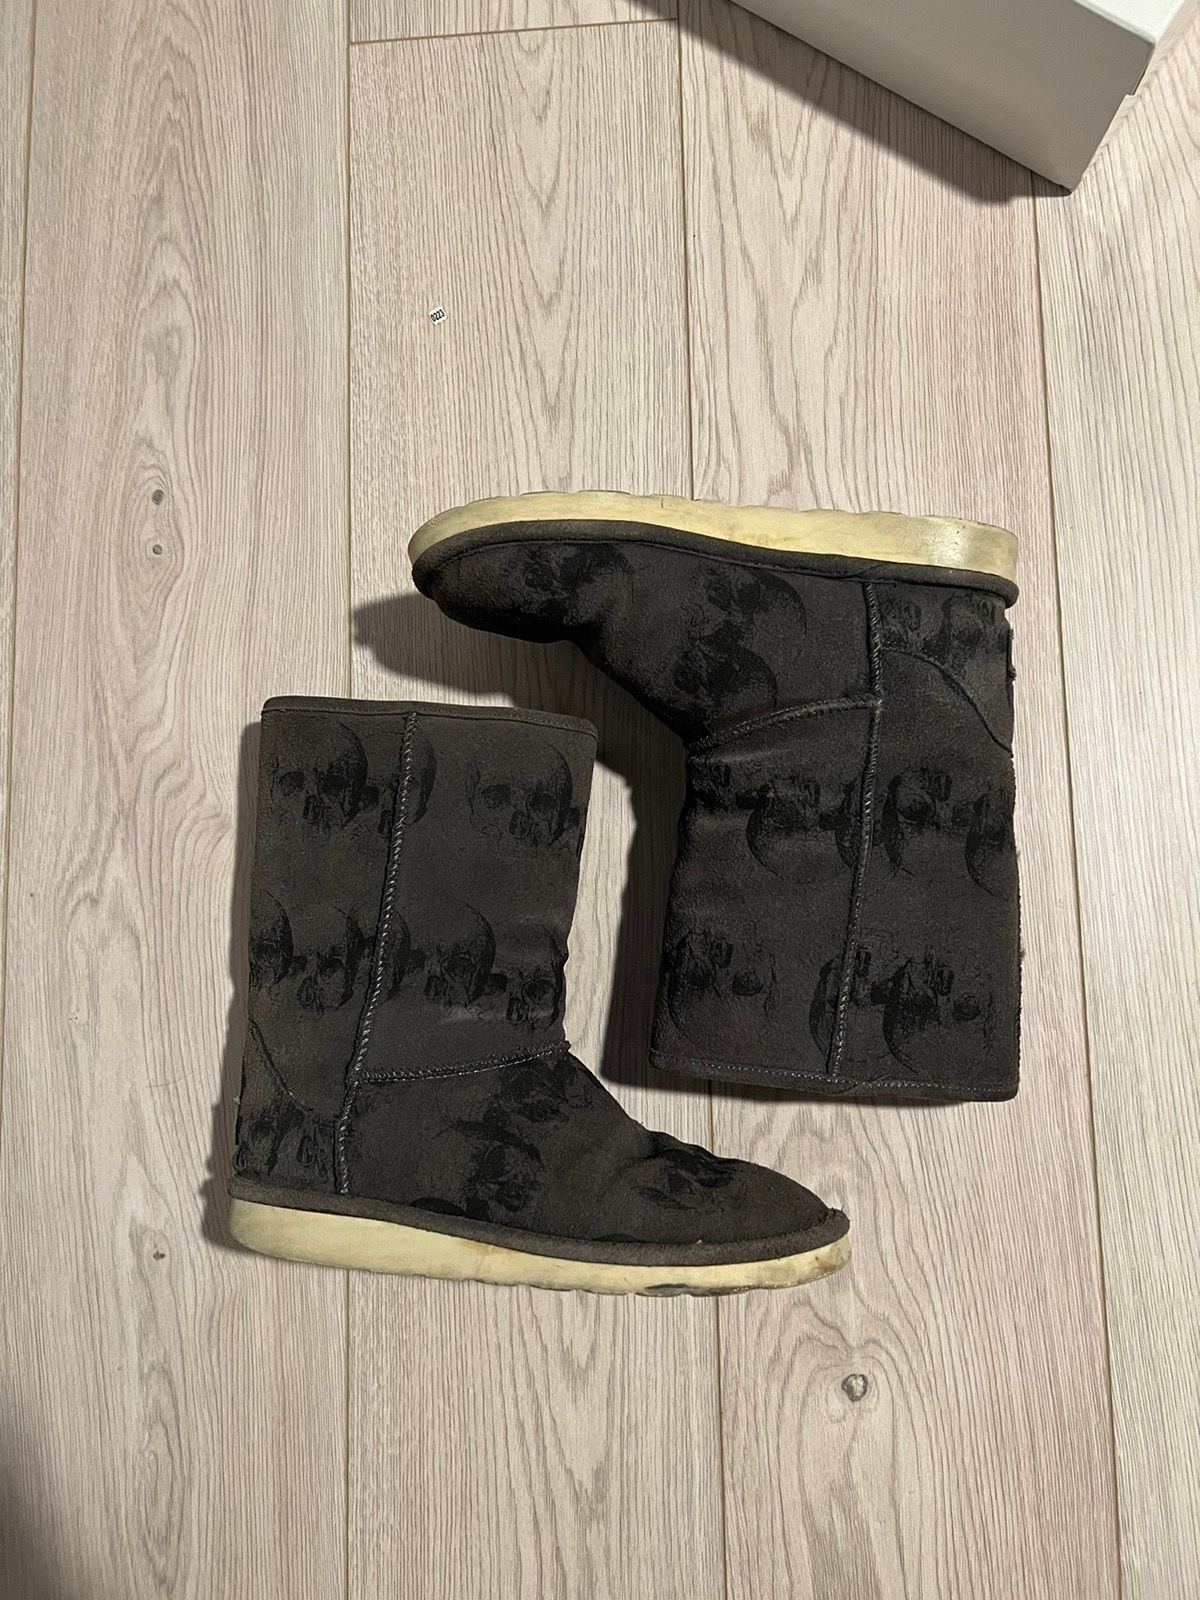 Hysteric Glamour Skull UGG Shoes - 2